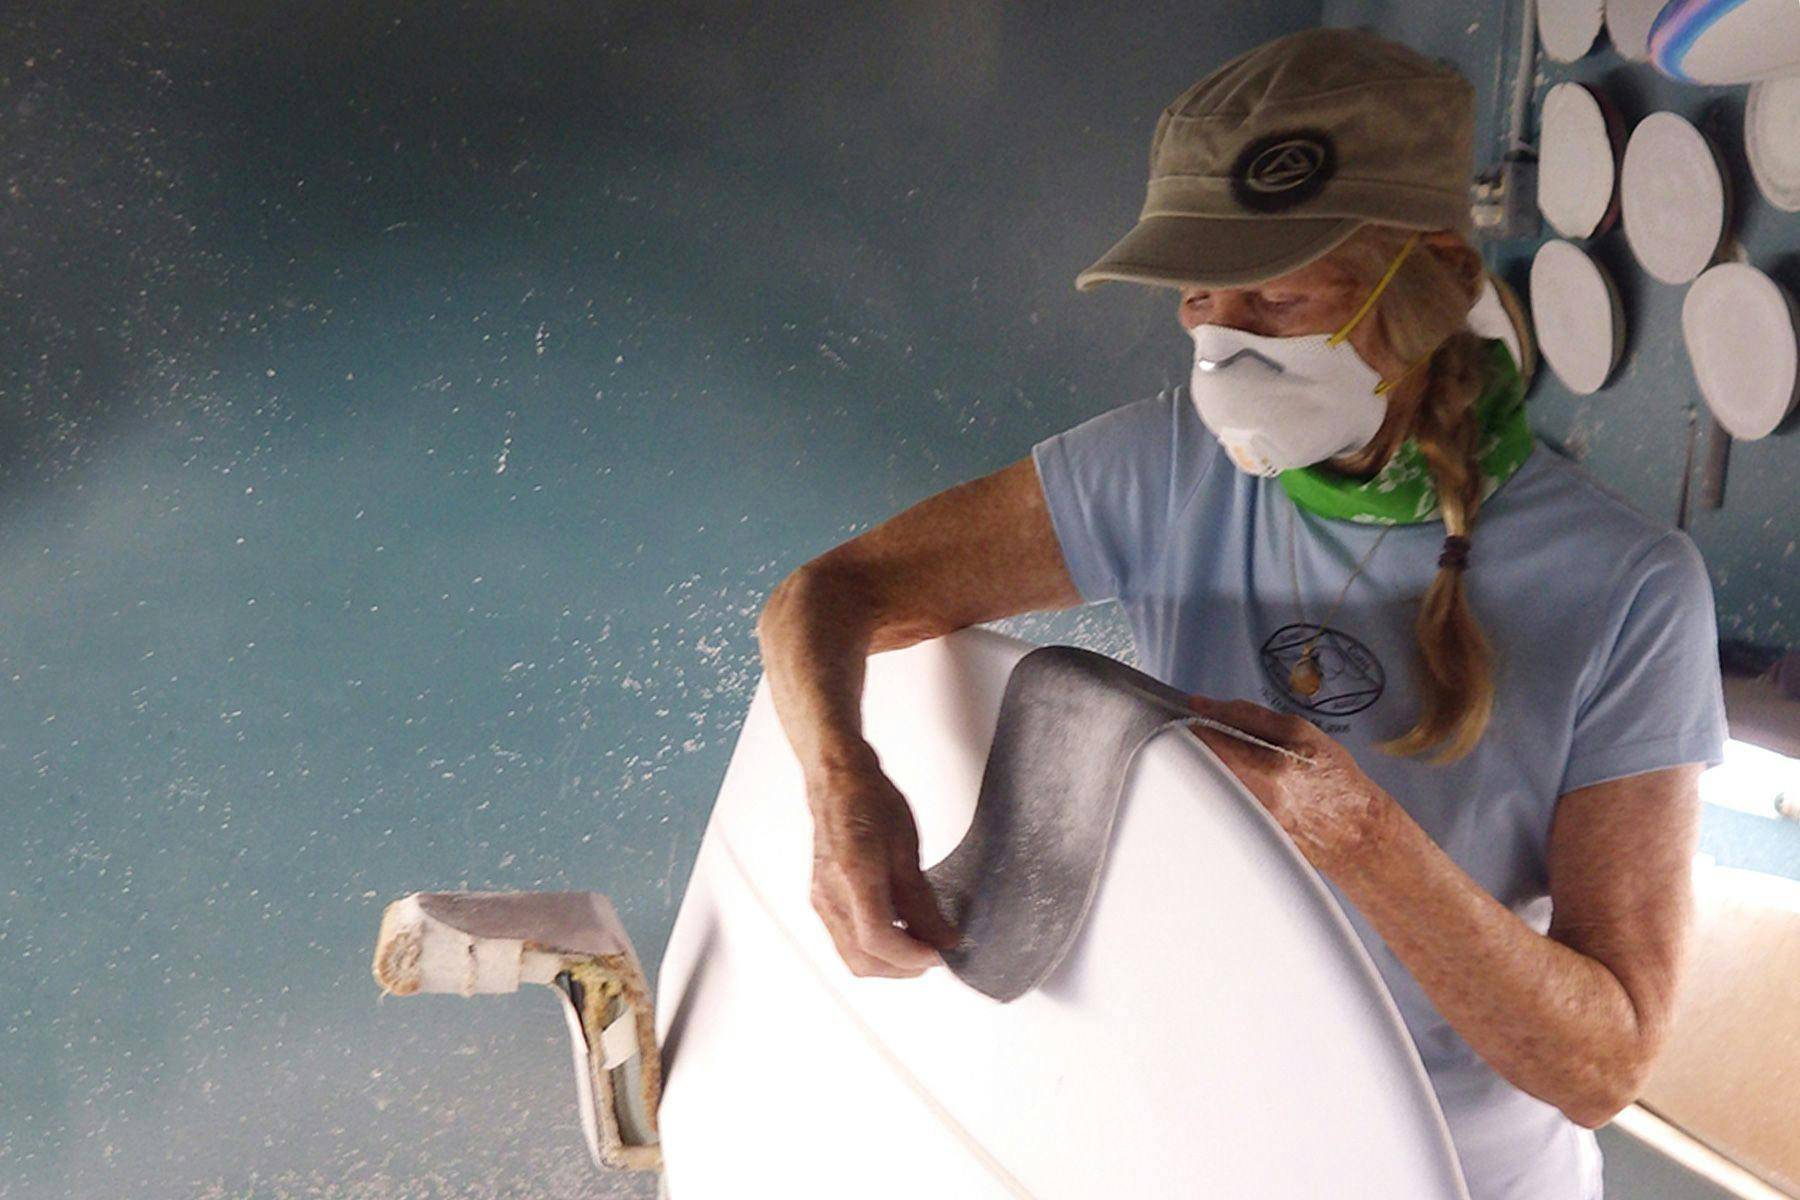 cher pendarvis shaping the rails of a surfboard